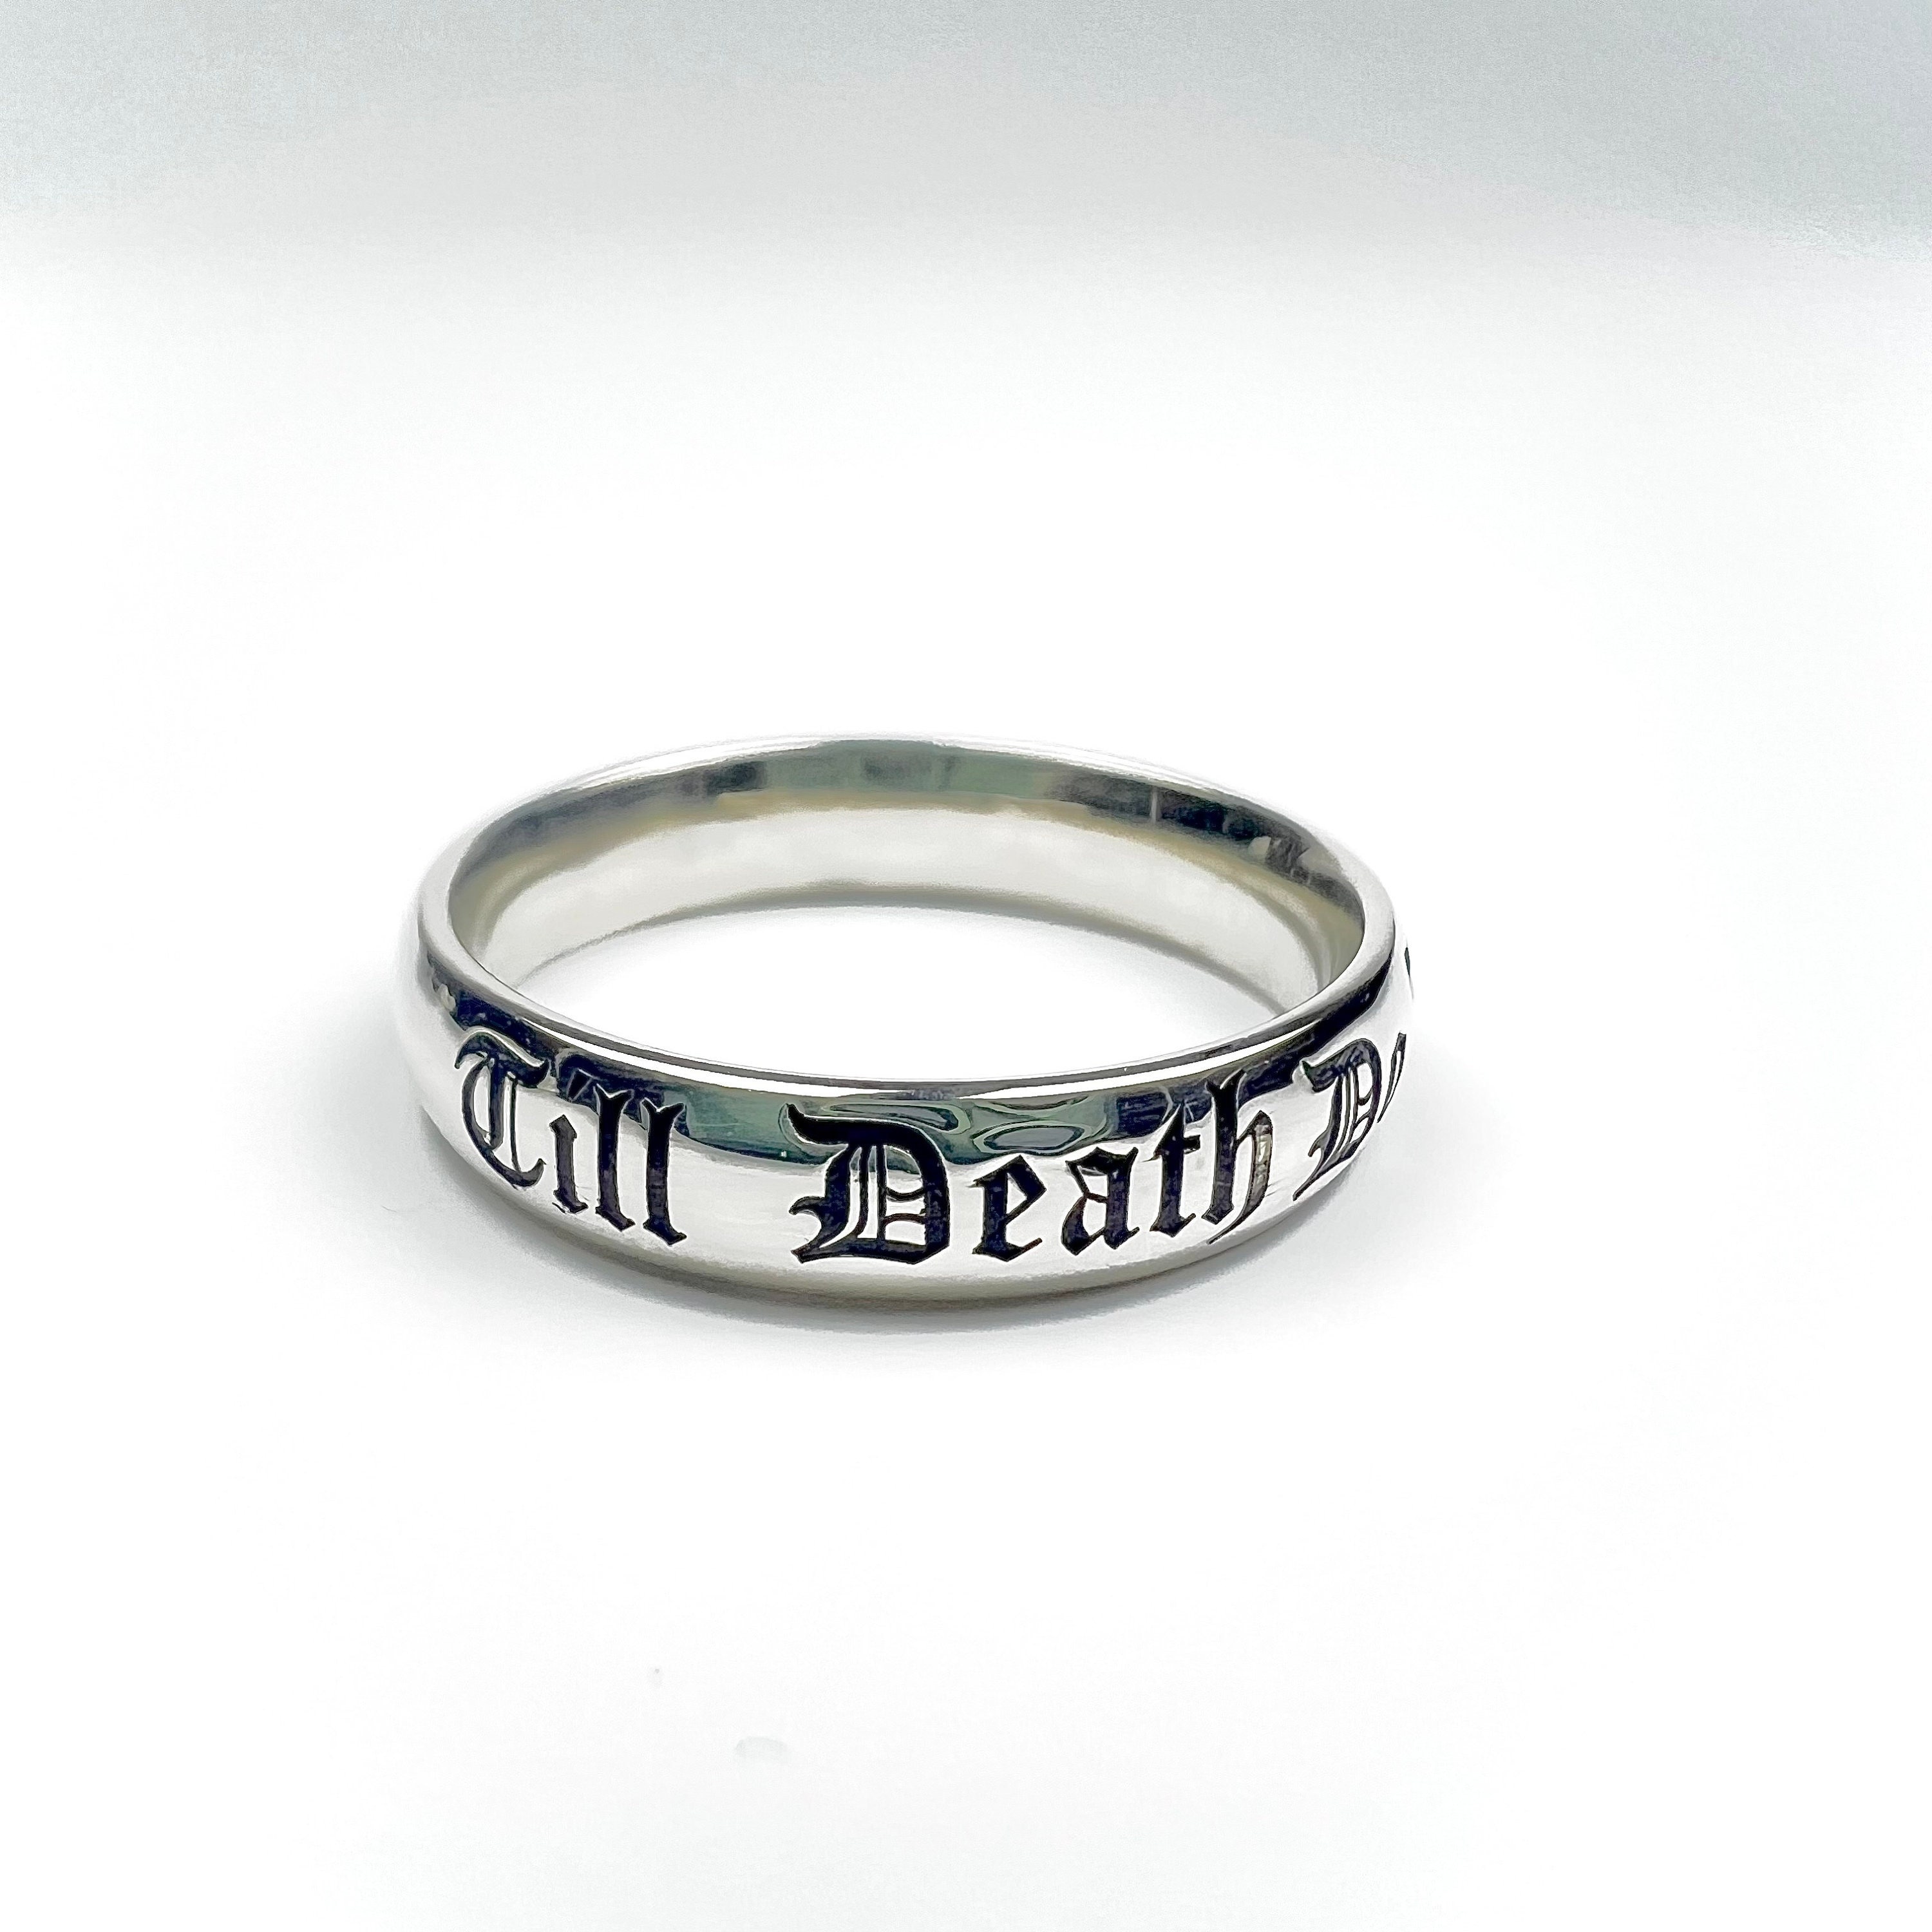 Personalized Engraved Ring Band in 925 Silvercustom Engraved - Etsy